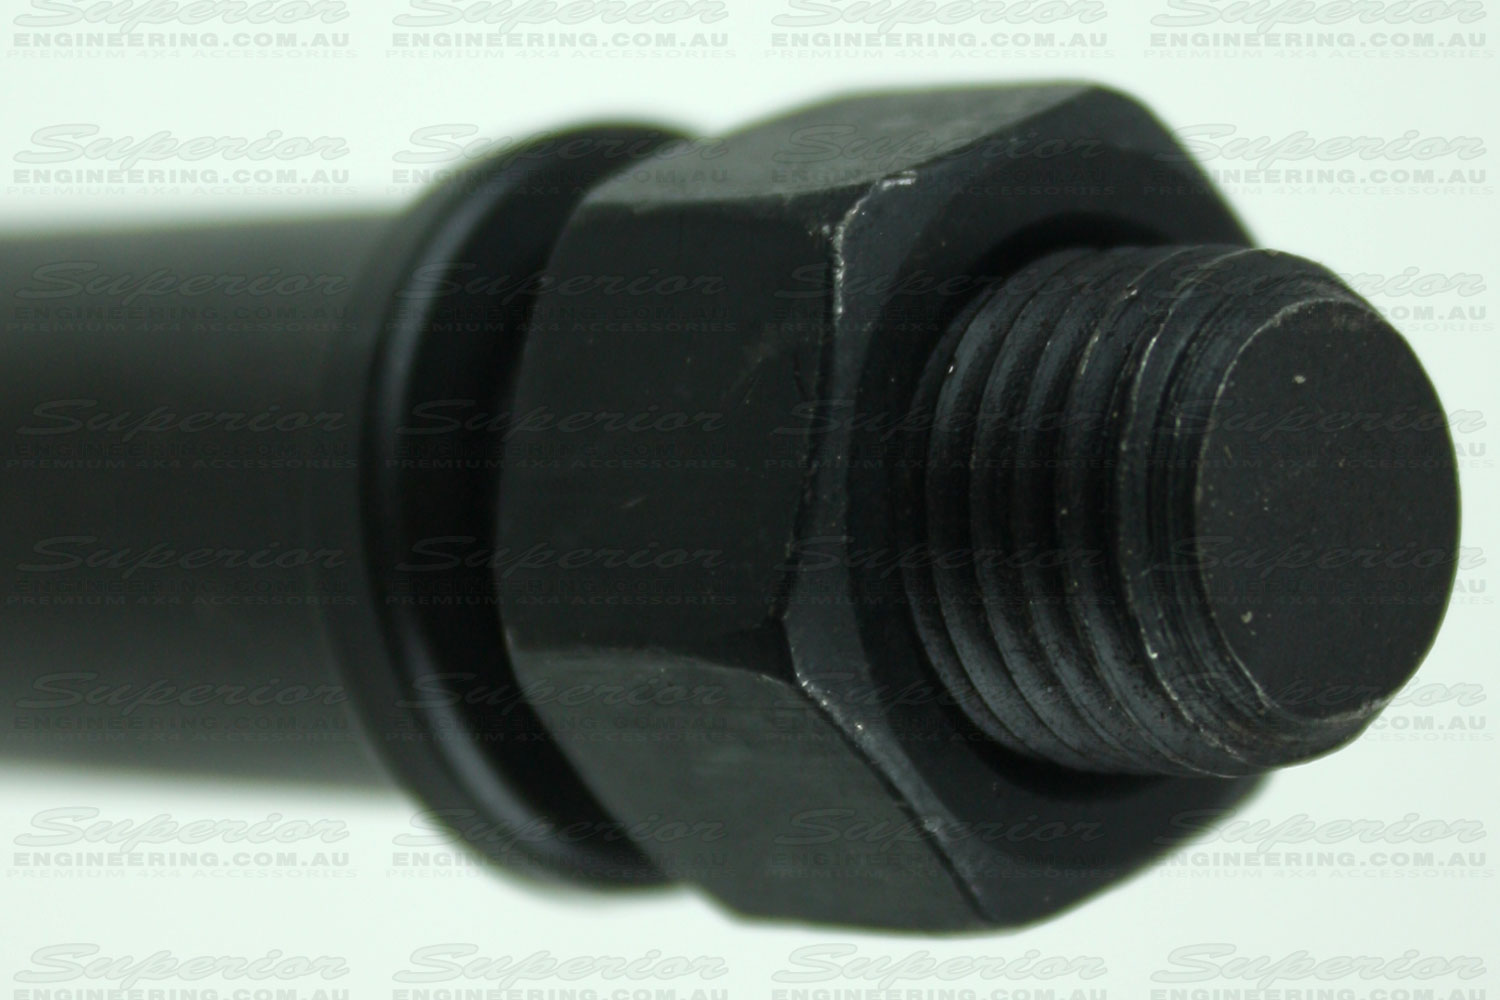 Closeup view of the main nut and washer on the fixed pin